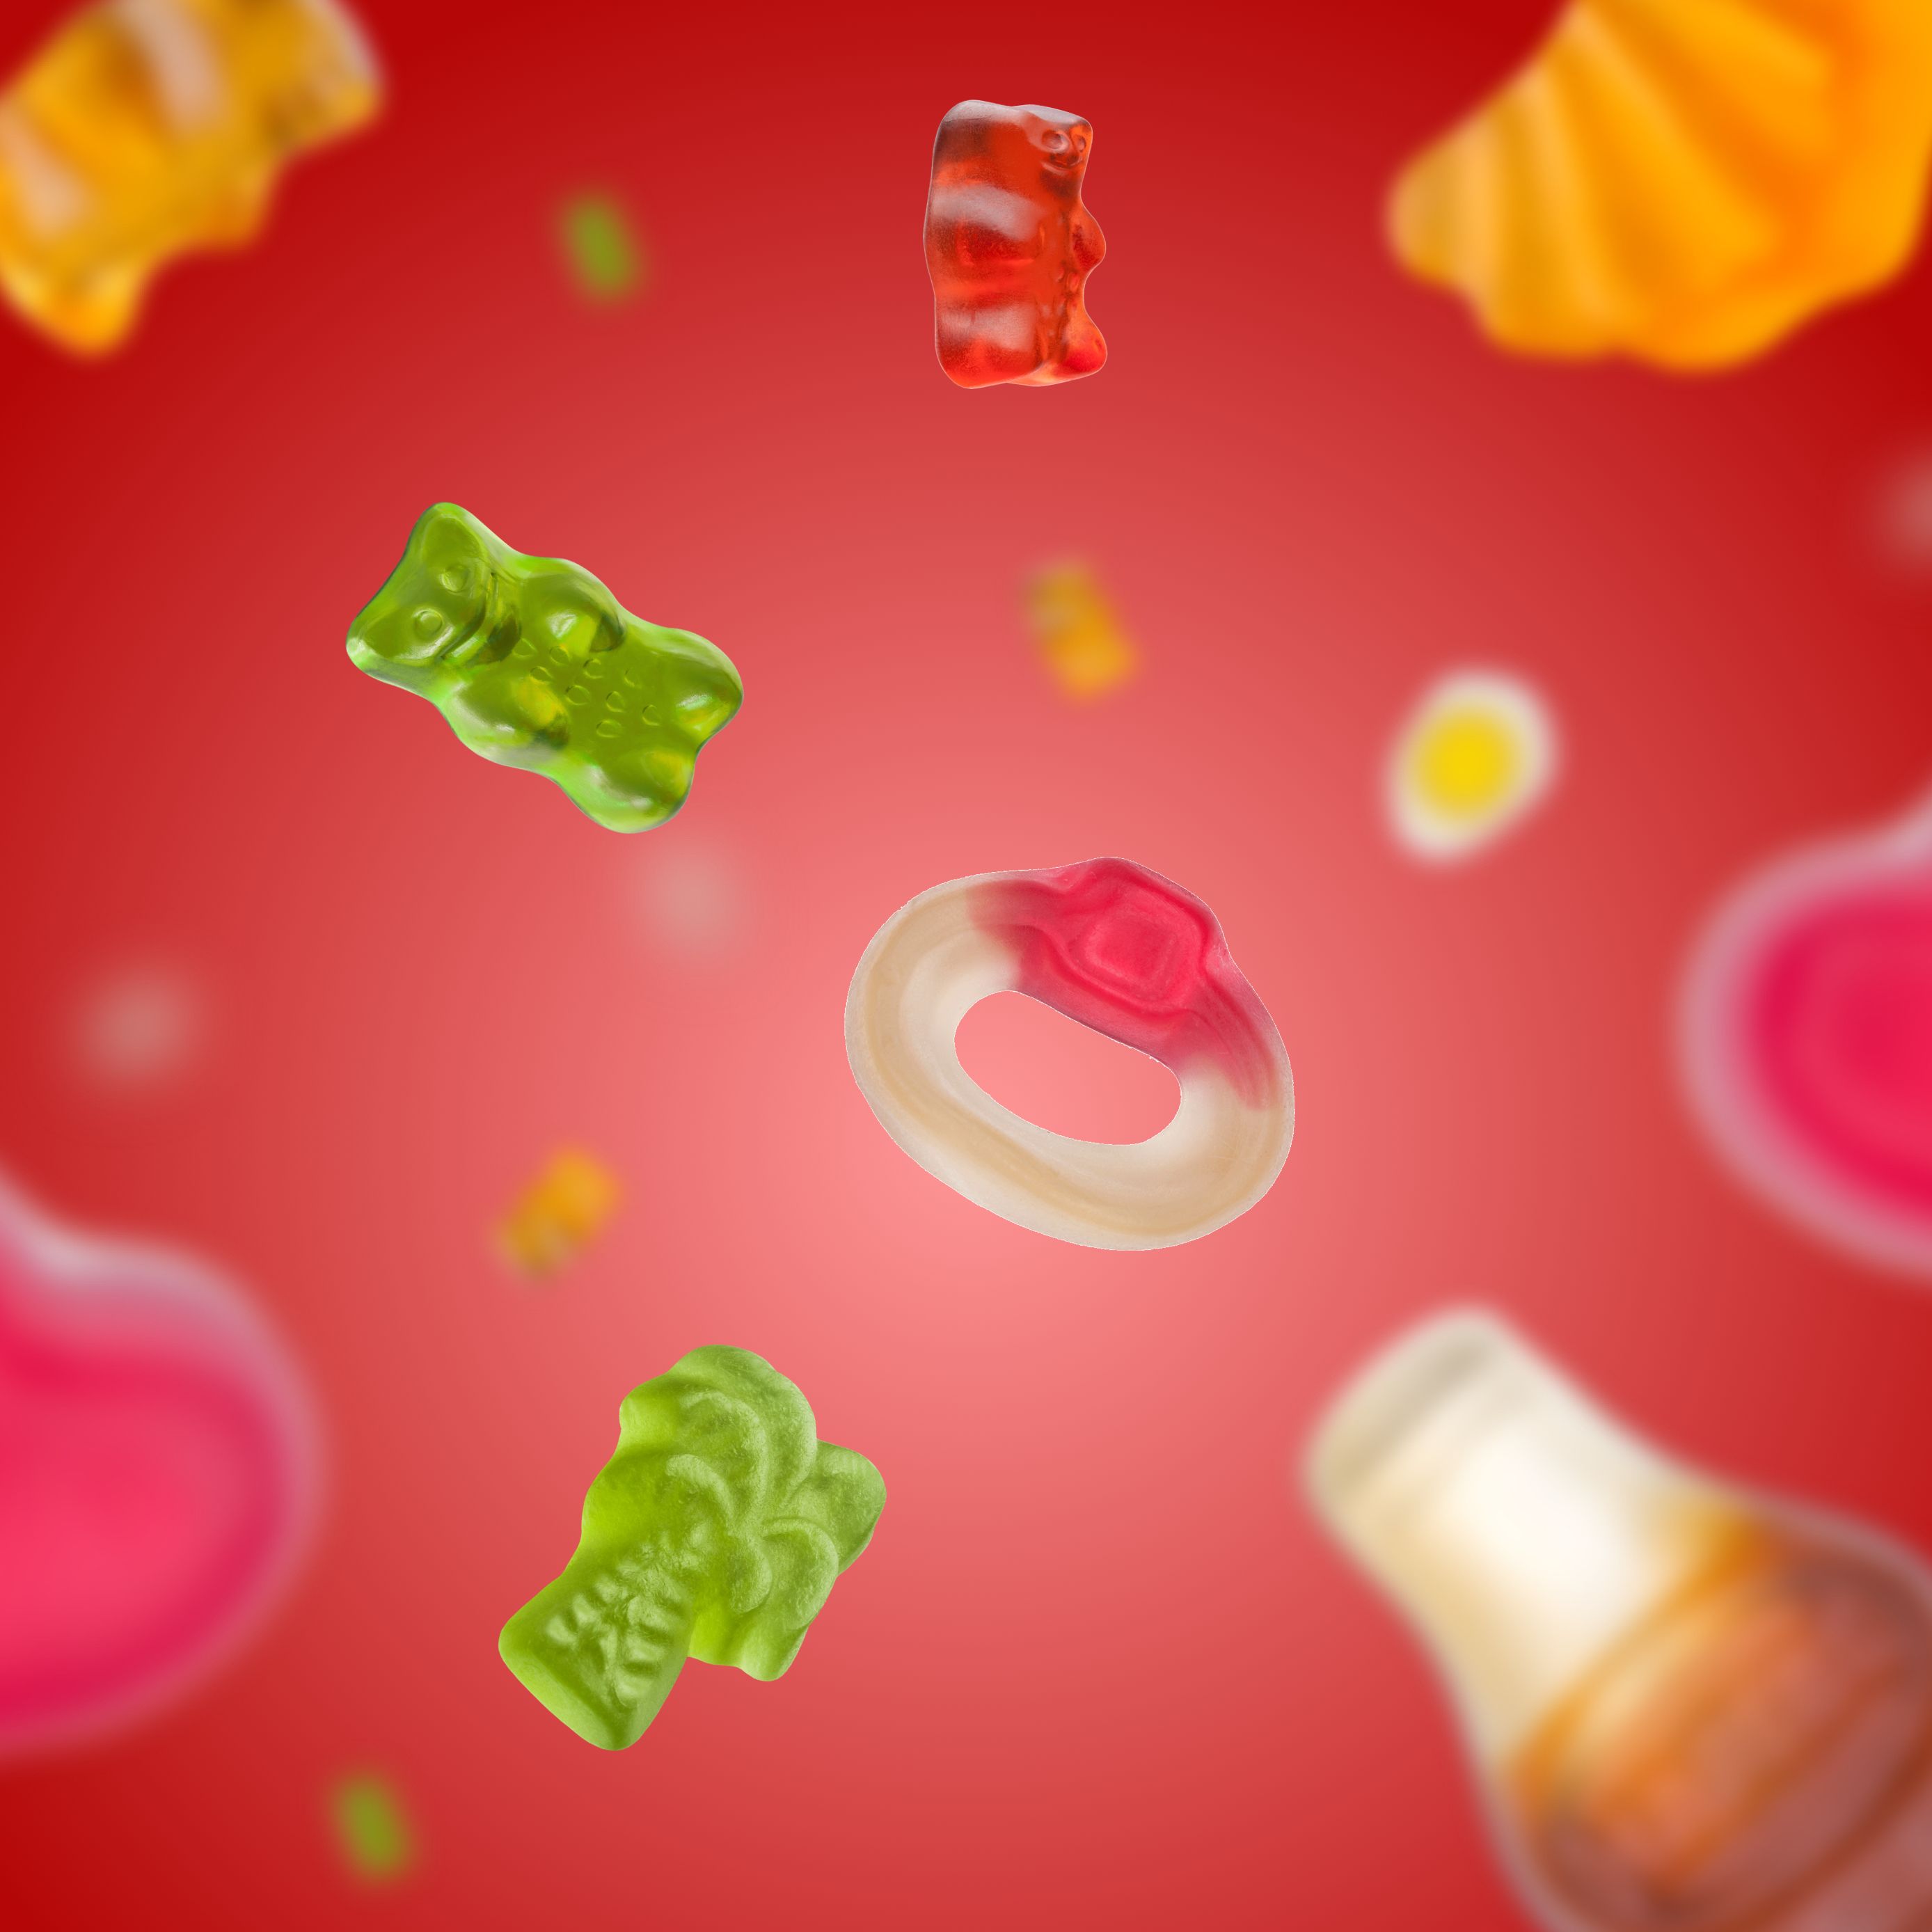 Products HARIBO (Stage Mobile, Teaser, Menu, 1:1)